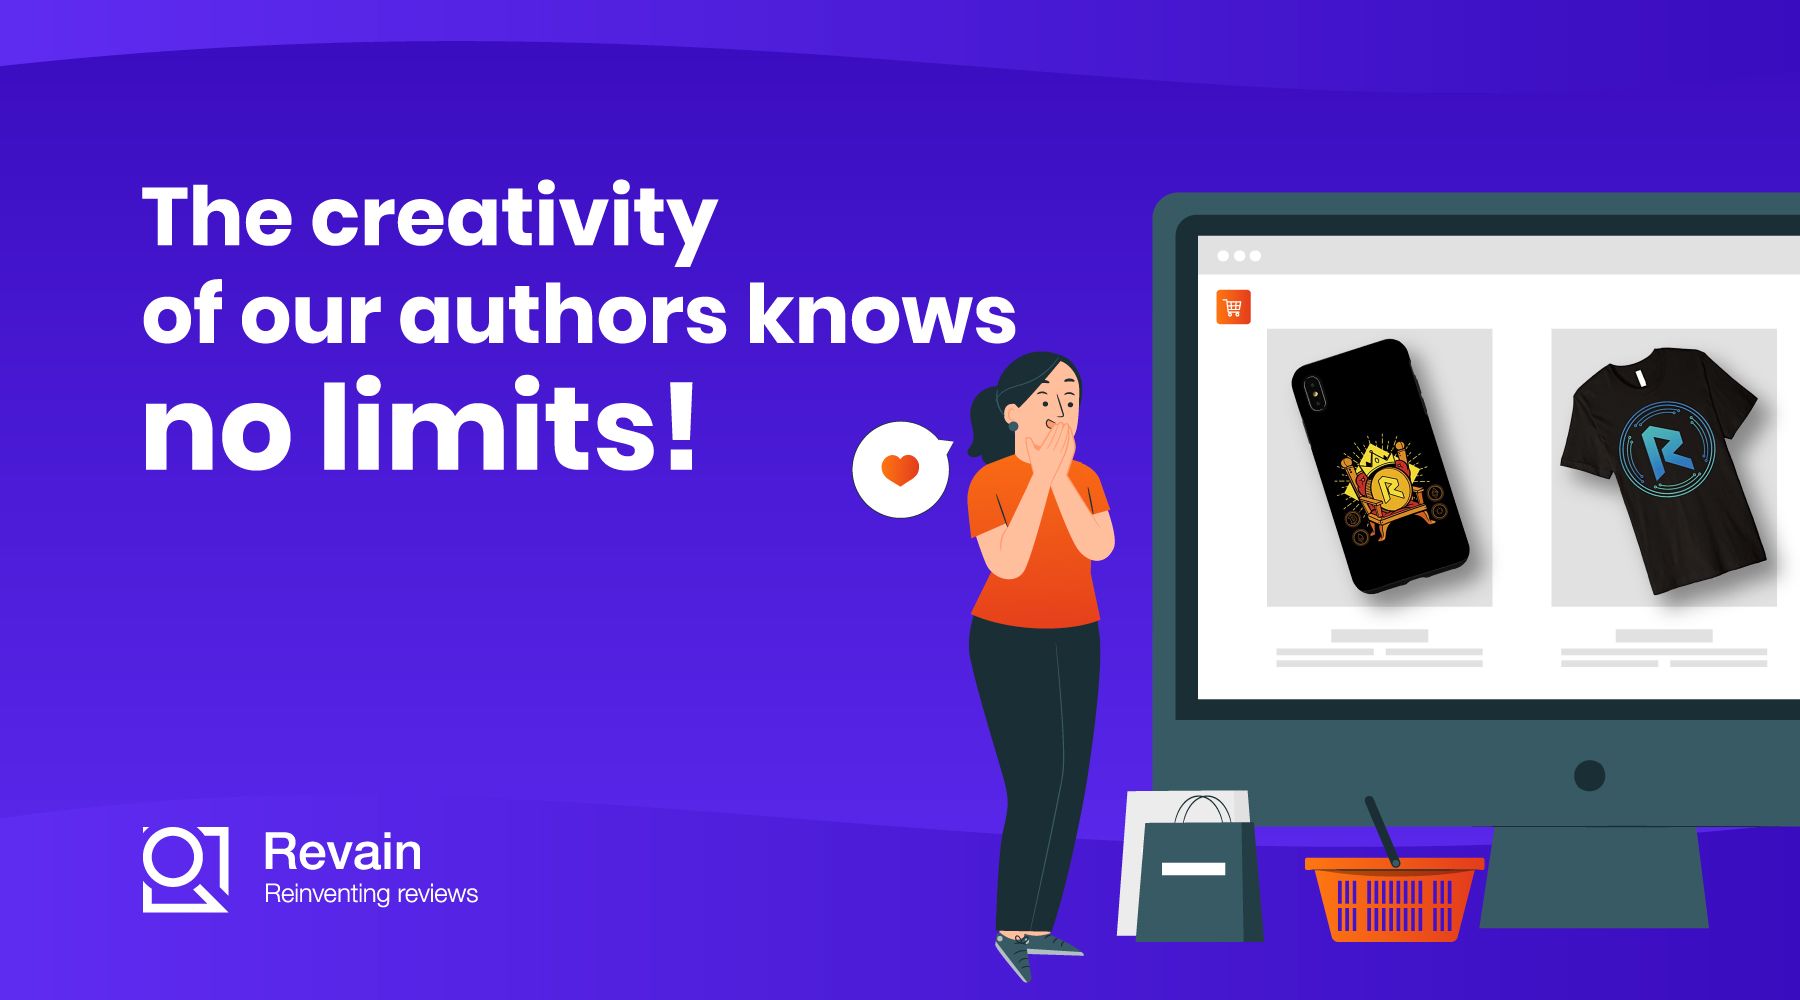 Article The creativity of our authors knows no limits!